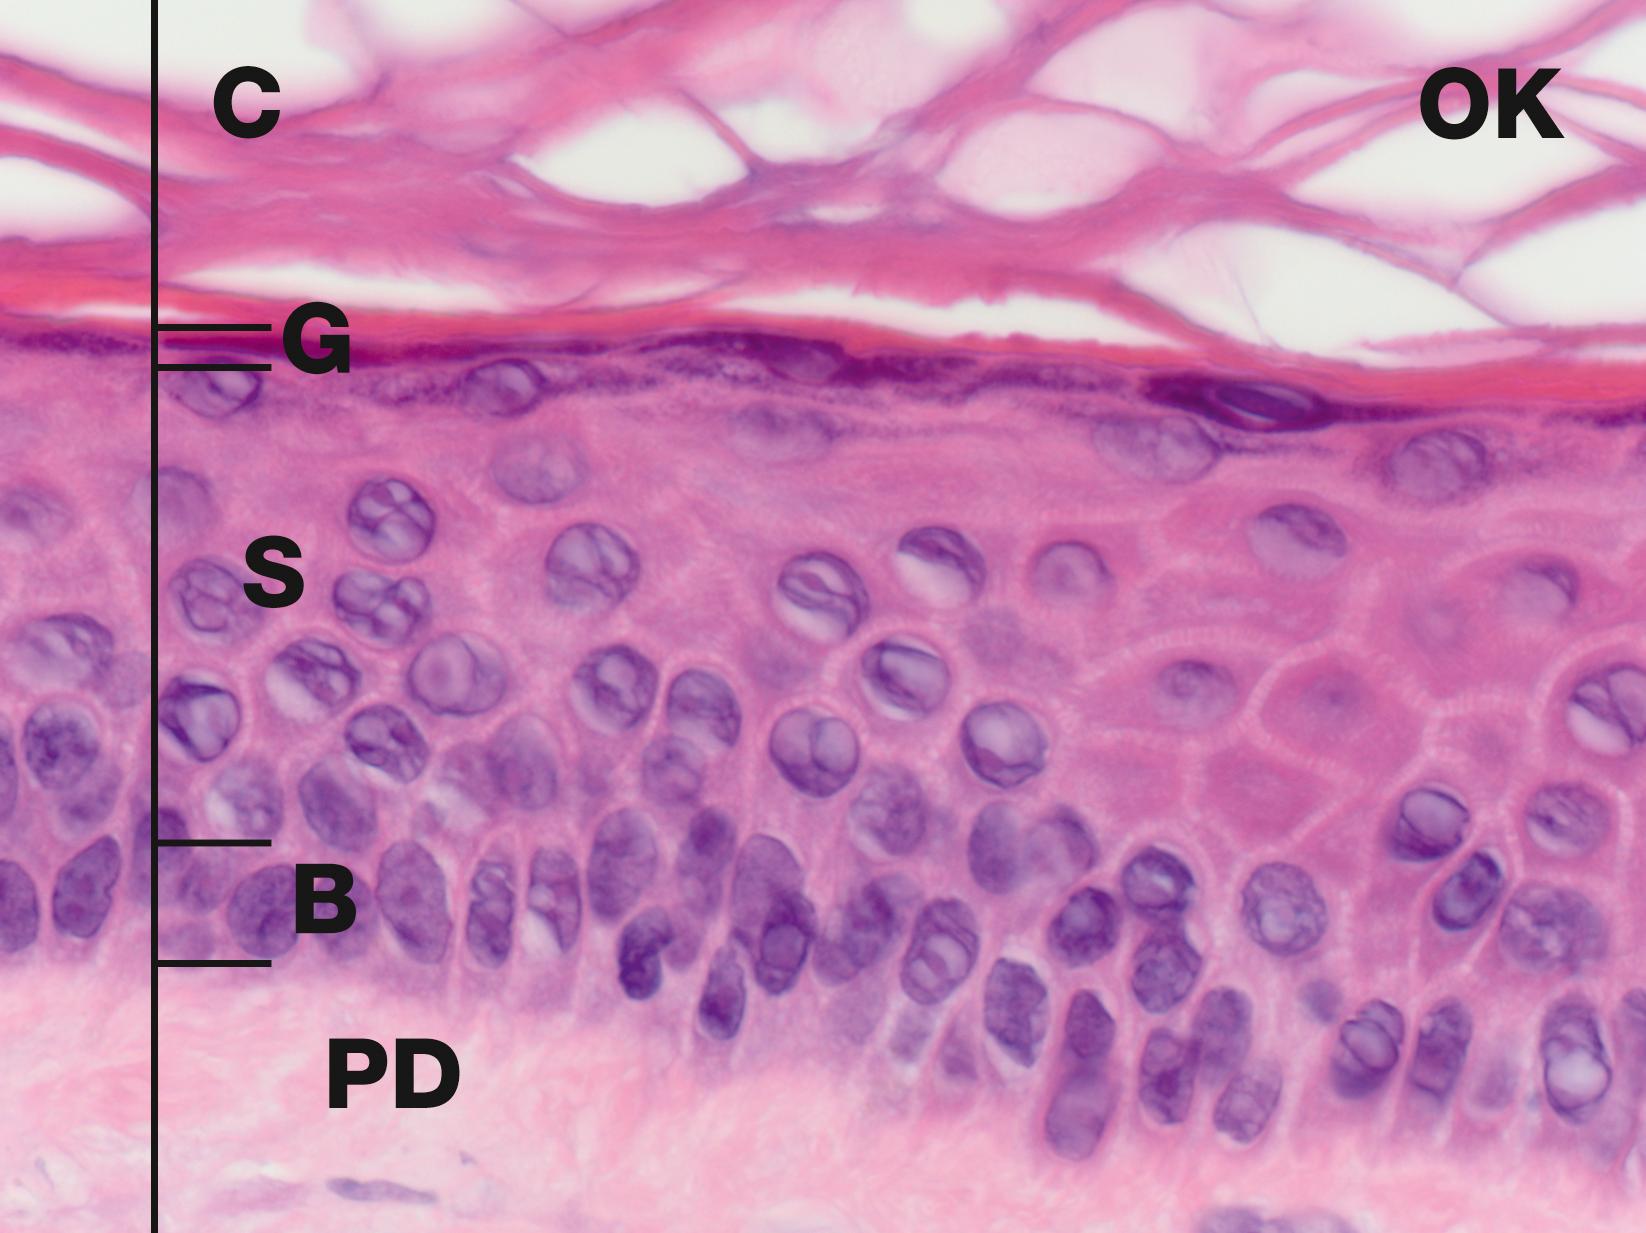 E-Fig. 21.1 H, Epidermis H&E (HP). The cells of the epidermis are called keratinocytes . The basal layer of keratinocytes (stratum basale) B proliferates continuously with repeated mitotic divisions. This provides cells for a progressive process of displacement towards the surface (upward migration), with associated maturation to renew the other layers. The basal cells are arranged as a single layer of cuboidal or low columnar cells. They are attached to the basement membrane (not seen in these preparations) on their dermal (basal) surface. This basal surface is irregular; the basal cells have a highly indented and folded basal cell membrane with numerous hemi-desmosomes. Superficially, the basal cells are attached to and mature into the cells of the stratum spinosum S which forms the majority of the epidermis. The stratum spinosum is also known as the prickle cell layer. It is multilayered and composed of polyhedral-shaped keratinocytes with round-oval nuclei, prominent nucleoli and cytoplasm, forming a pavement-like pattern. These cells synthesise cytoplasmic intermediate filaments called cytokeratins which accumulate in aggregates called tonofibrils made up of bundles of tonofilaments. These tonofibrils bind to the numerous desmosomes that form strong contacts between adjacent keratinocytes. The keratinocytes mature into the stratum granulosum G or granular layer. Here they acquire dense basophilic, keratohyaline granules which contain proteins rich in sulphur-containing amino acids (cysteine) and proteins such as involucrin which interact with the cytokeratin tonofibrils in the final maturation. The combination of tonofibrils with keratohyaline granule proteins produces keratin, in a process called keratinisation. Progressing towards the surface, the cells lose their nuclei and cytoplasm, becoming flattened interconnected keratin squames (plates/flakes of keratin) which comprise the surface coating of the skin, the stratum corneum C. These keratin squames connect at their edges, and in transverse sections form a folded basket-weave pattern called orthokeratosis OK. The squames are water repellent, in part because they are coated with lipid-containing anti-wetting agents synthesised during maturation in the granular layer.